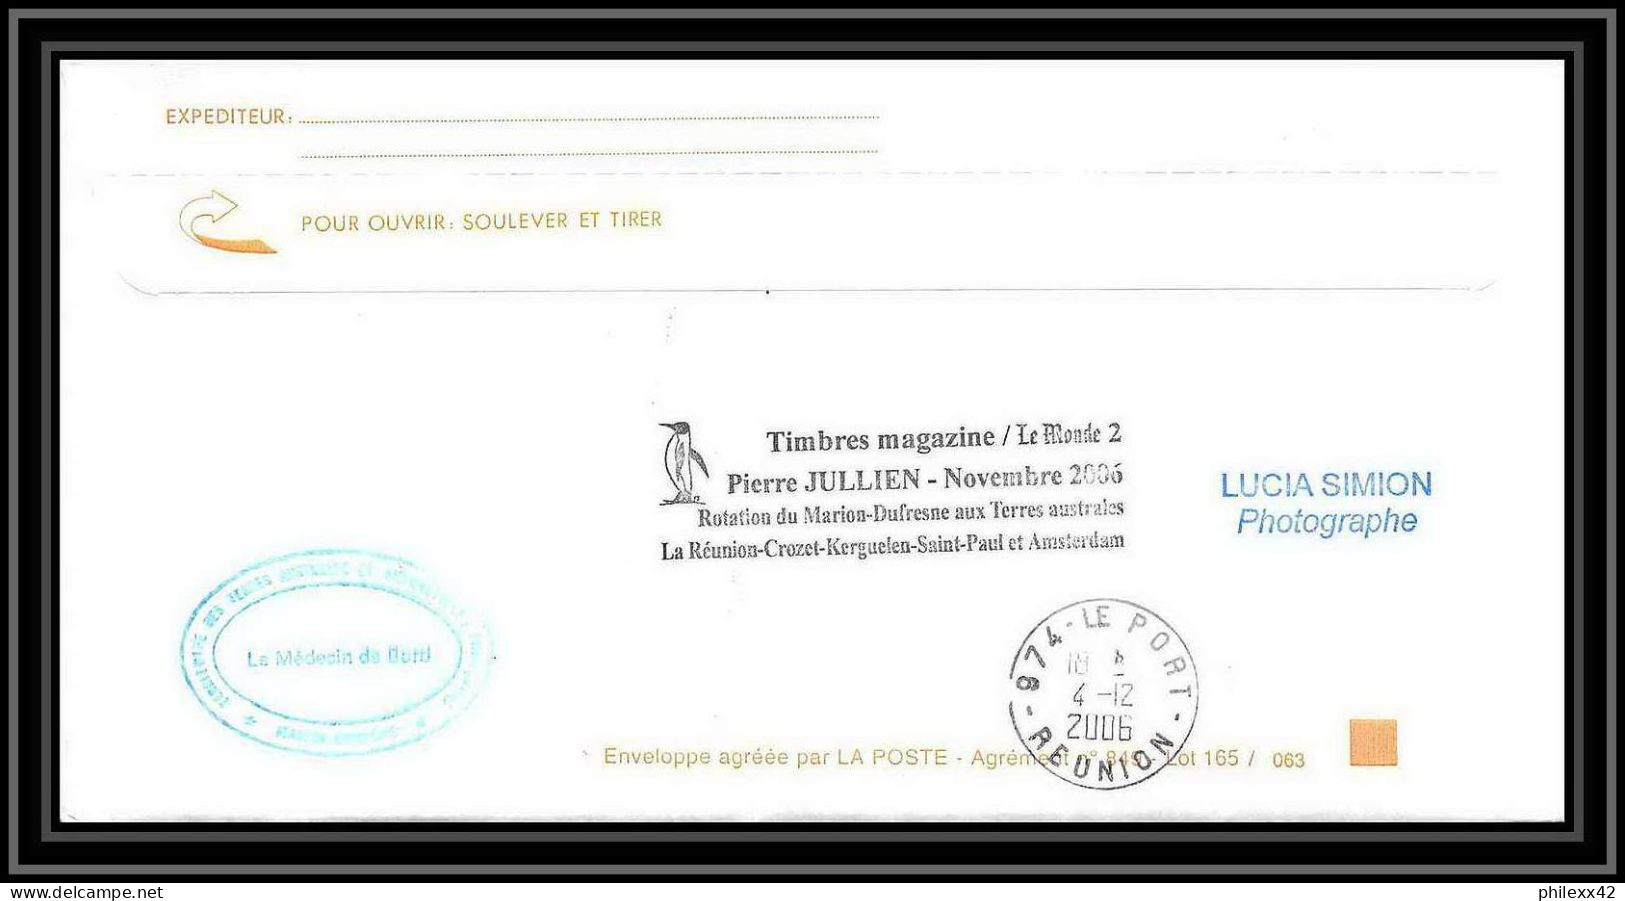 2618 ANTARCTIC Terres Australes TAAF Lettre Cover Dufresne 2 Signé Signed Op 2006/3 N°442 23/11/2006 St Paul - Antarktis-Expeditionen